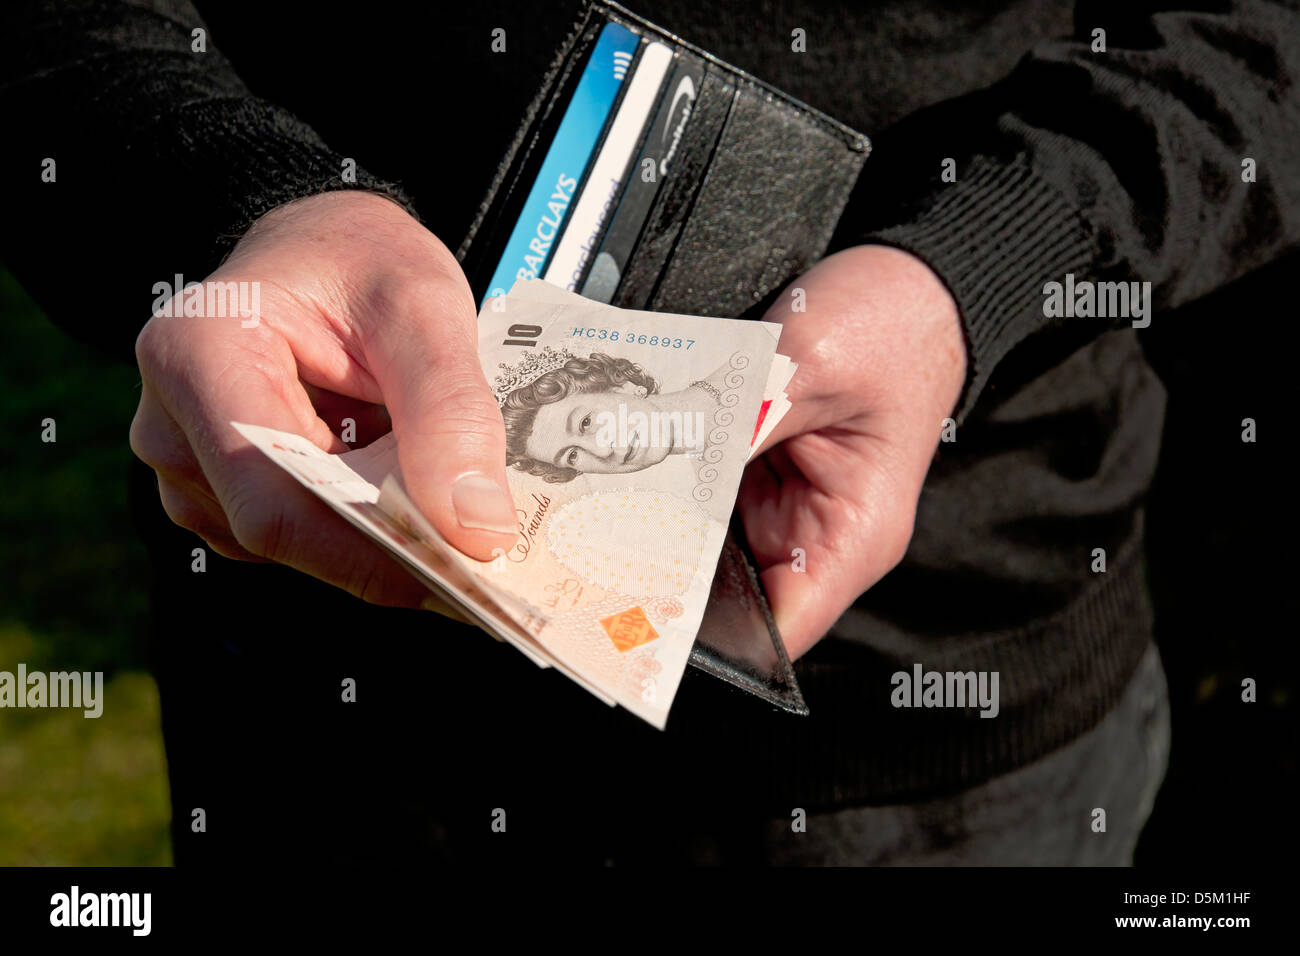 close up of man person holding wallet and 10 ten pound pounds note D5M1HF